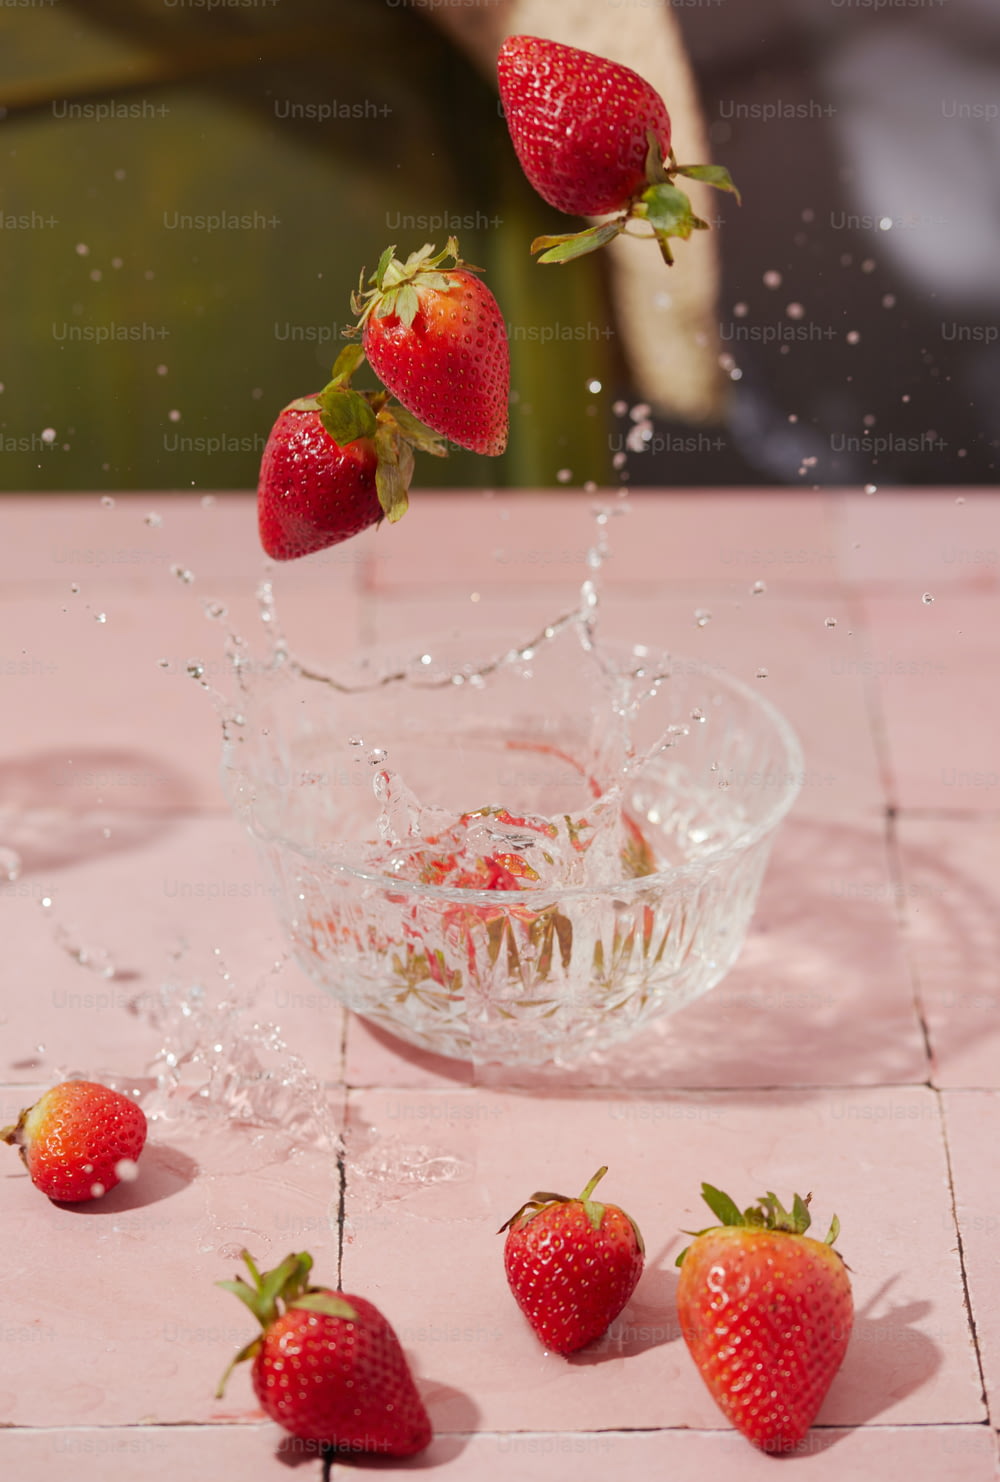 strawberries falling into a bowl of water on a table